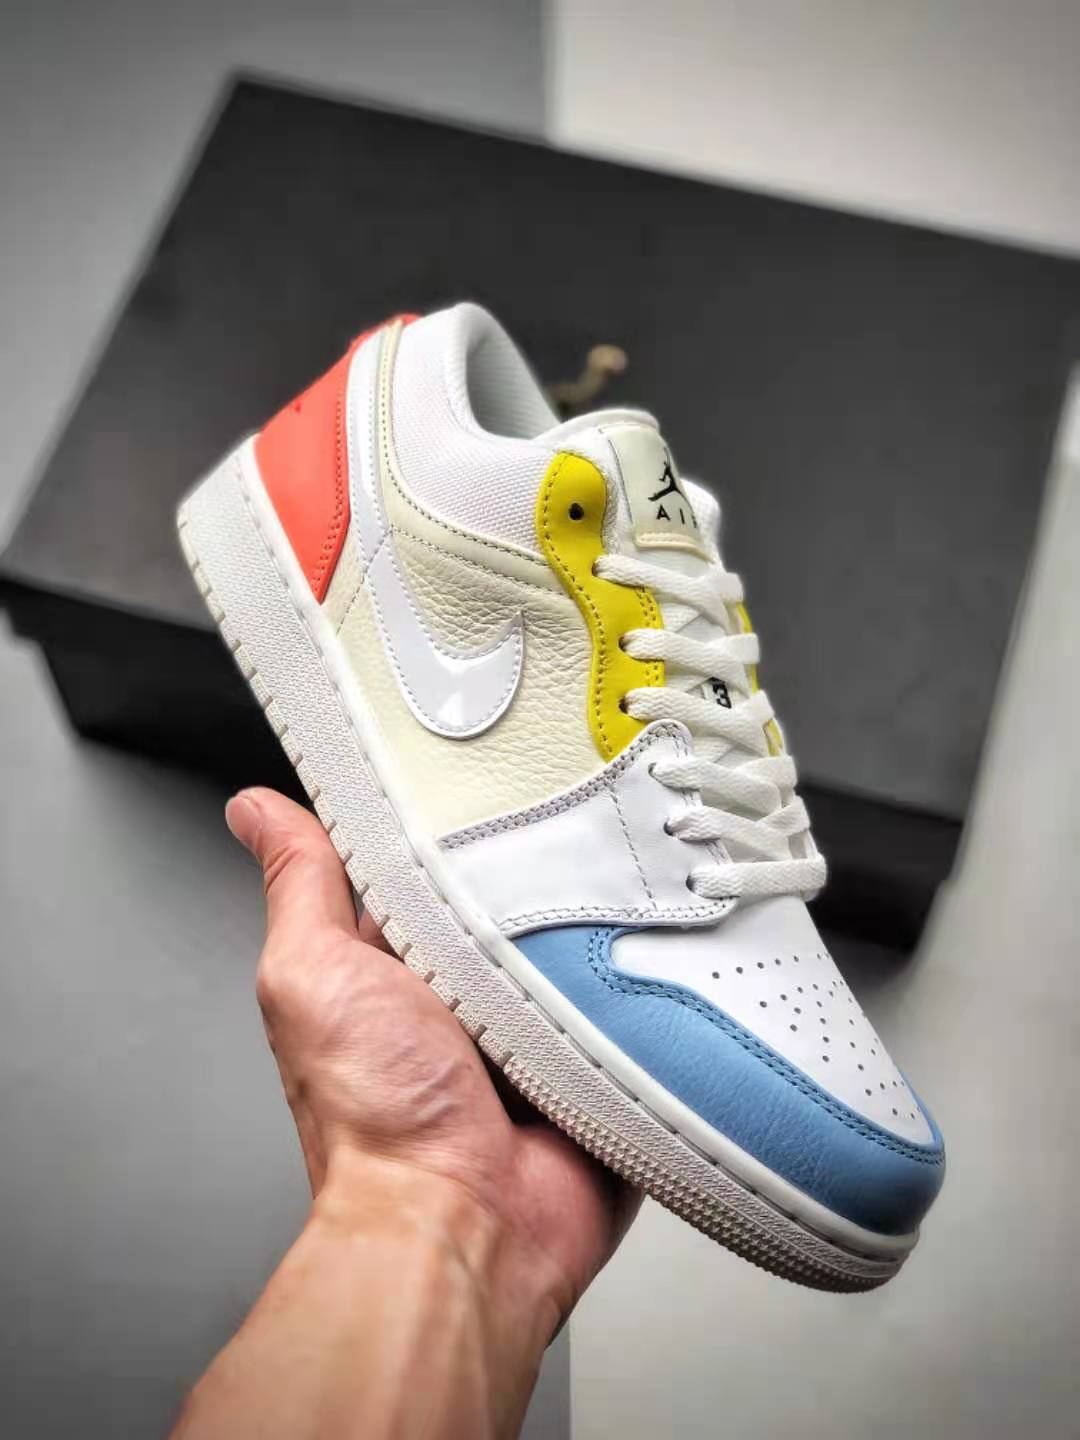 Air Jordan 1 Low 'To My First Coach' DJ6909-100 - Iconic Sneaker Tribute